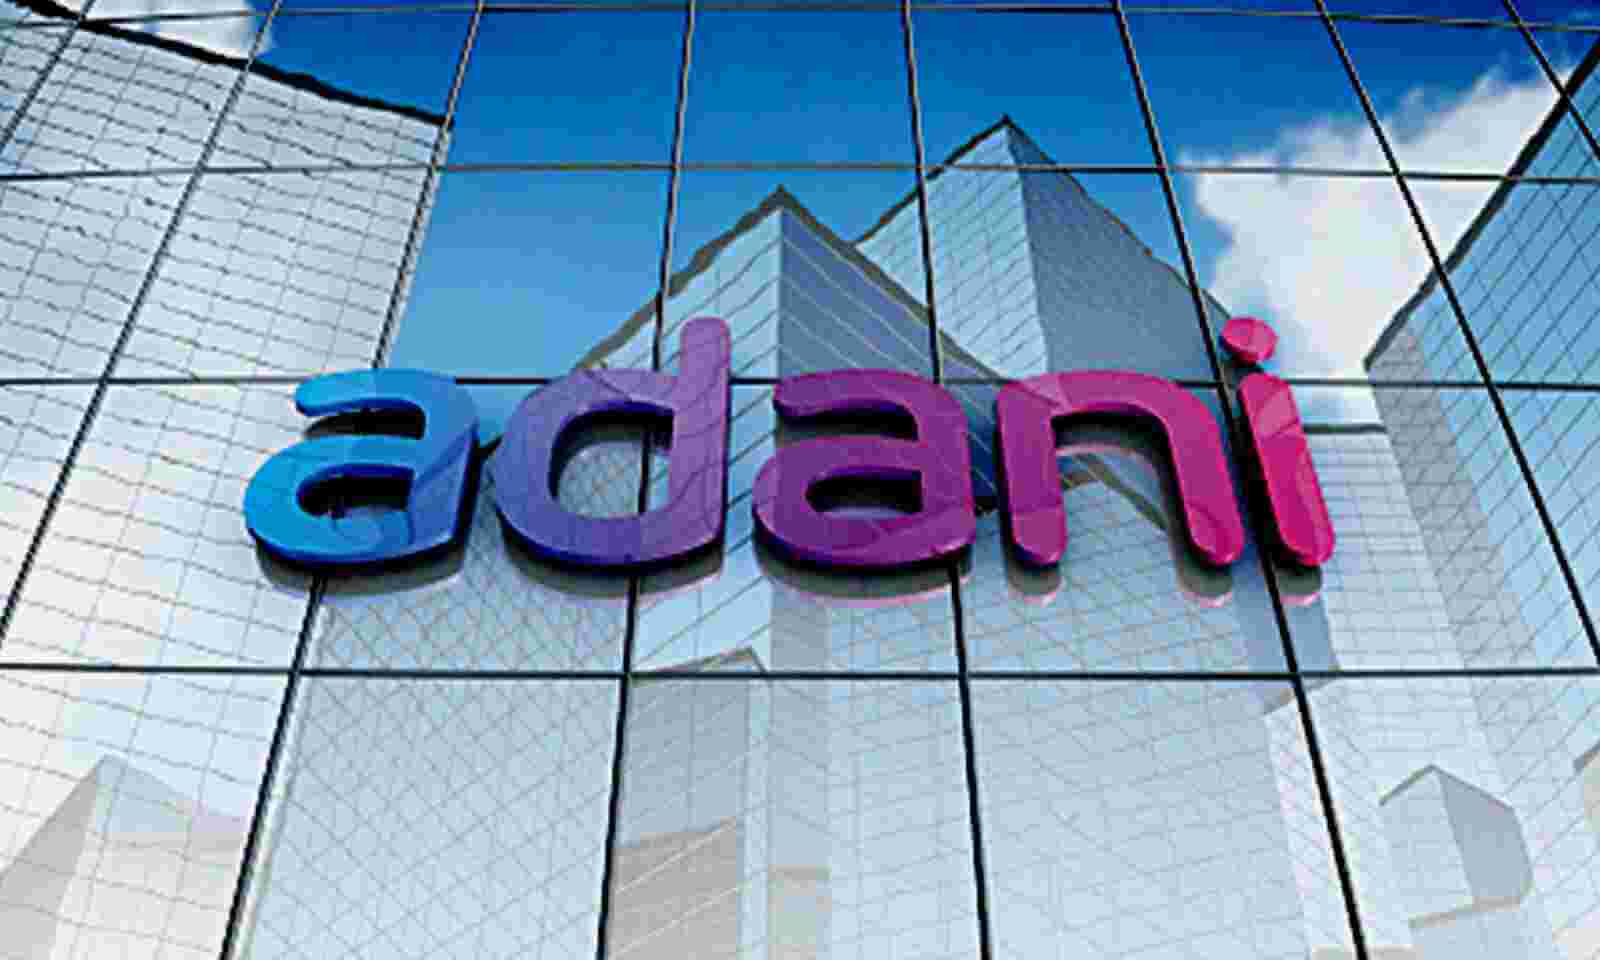 Adani Groups enters Indian cricket, gets Ahmedabad franchise for women’s IPL for Rs 1,289 cr